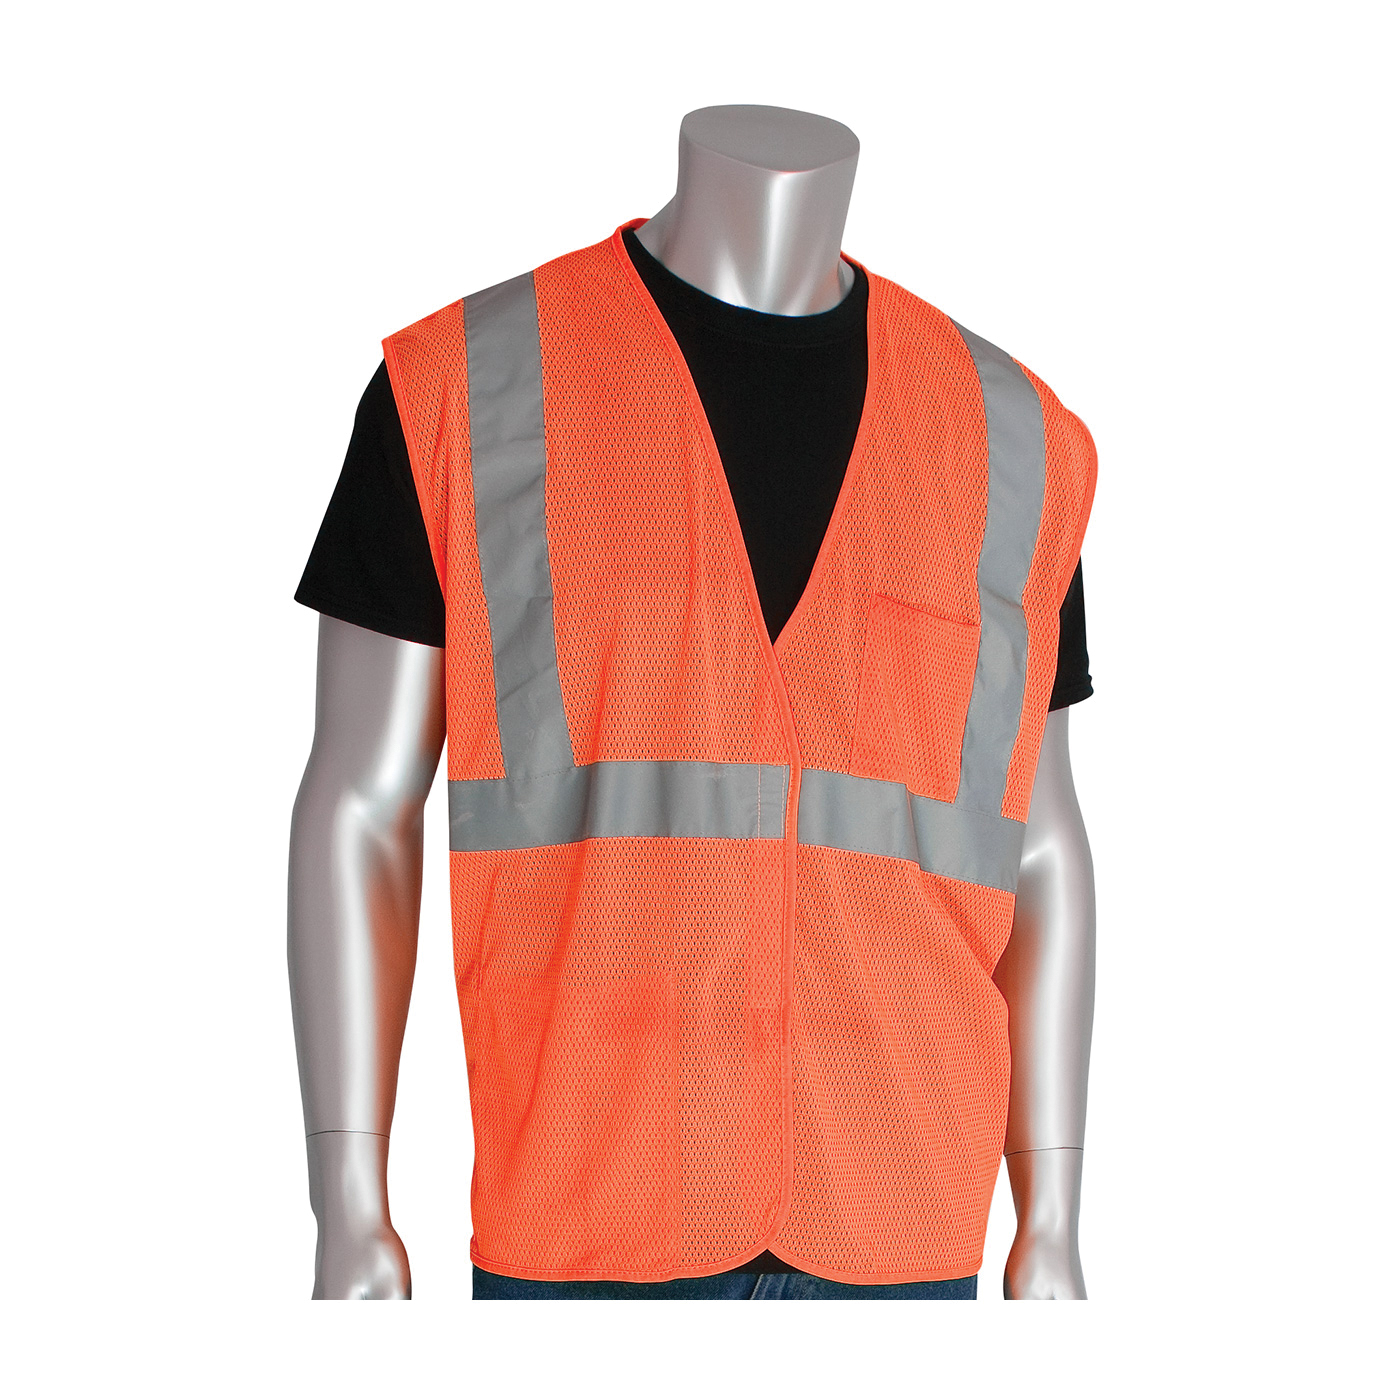 PIP® 302-0702-OR/L Safety Vest, L, Hi-Viz Orange, Polyester Mesh, Hook and Loop Closure, 2 Pockets, ANSI Class: Class 2, Specifications Met: ANSI 107 Type R